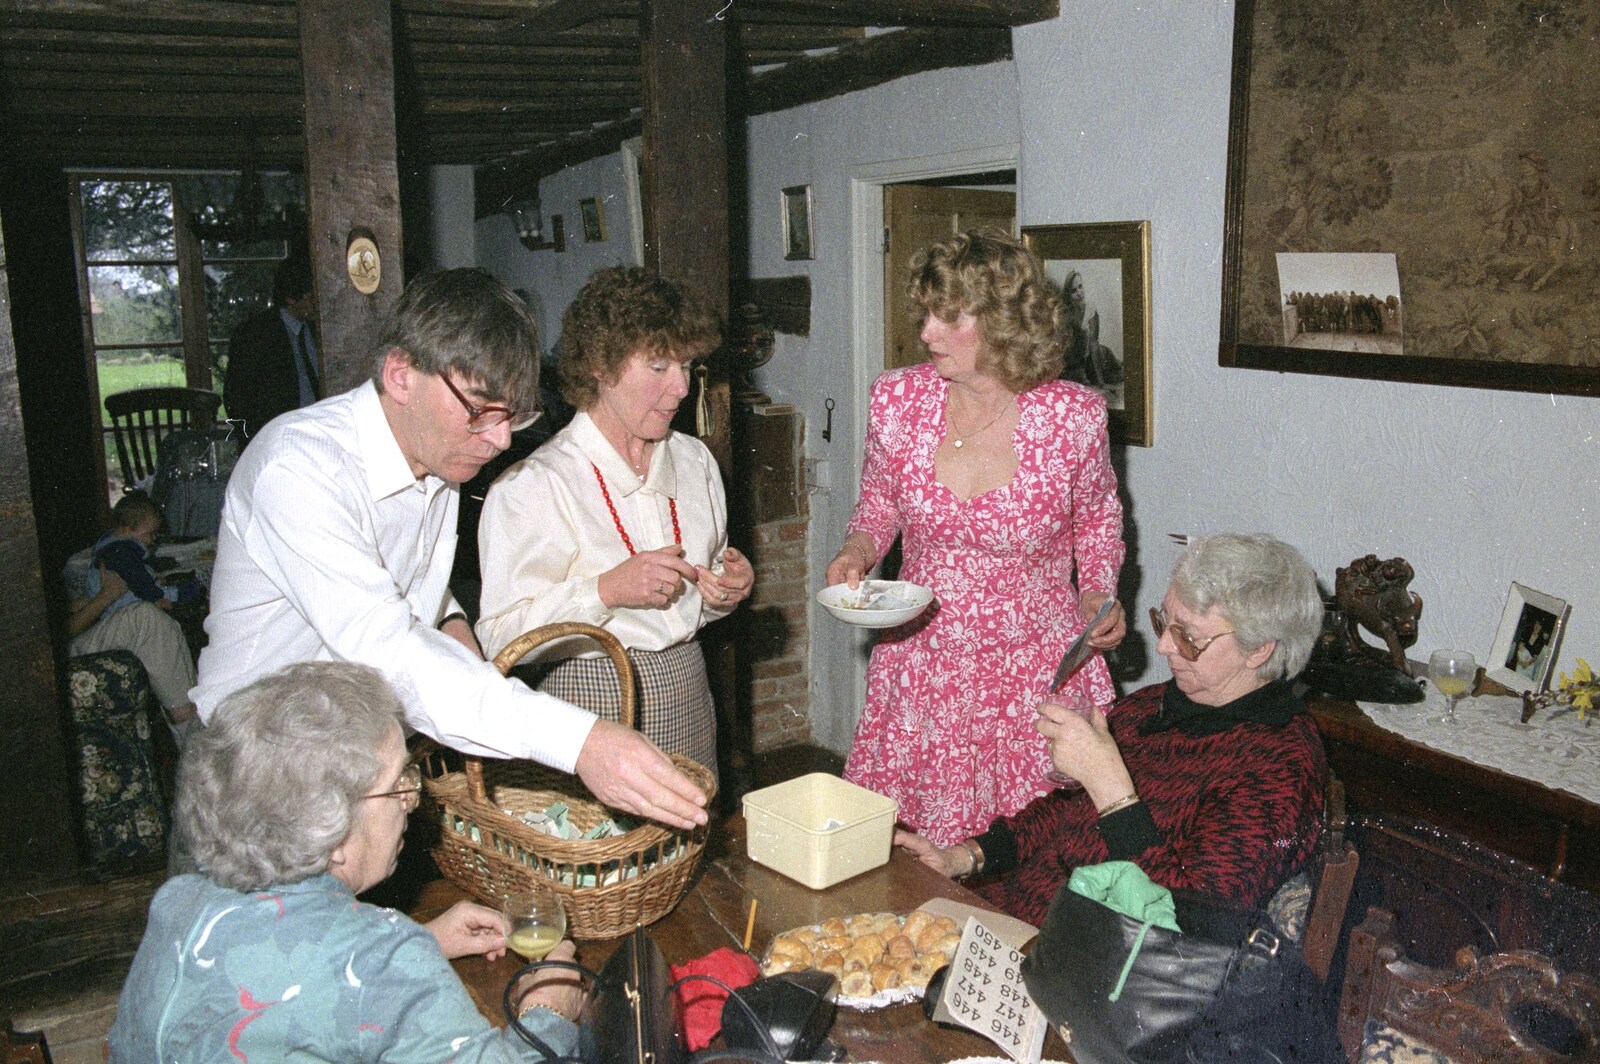 The raffle committee from Pancake Day in Starston, Norfolk - 27th February 1990